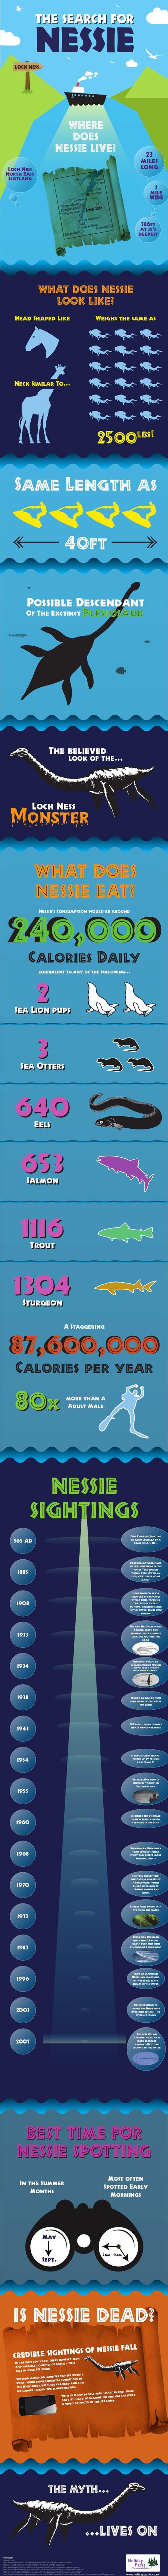 The Loch Ness Monster Infographic